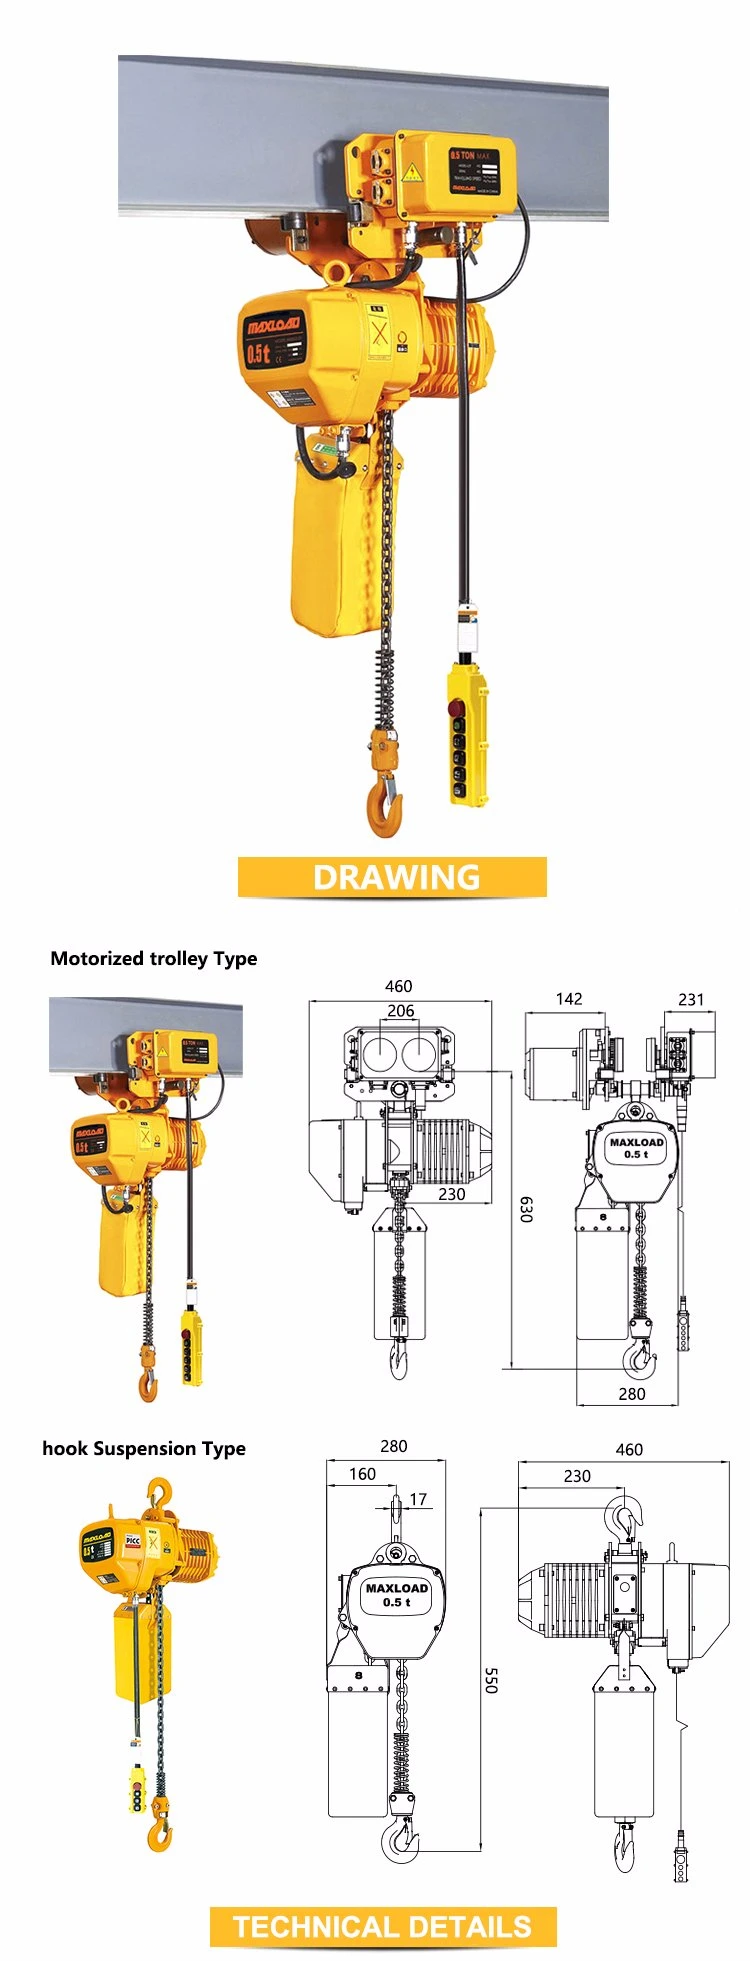 Toyo Japan Hot-Sales High Quality Electric Hoist /Electric Chain Hoist 0.5t From China Supplier